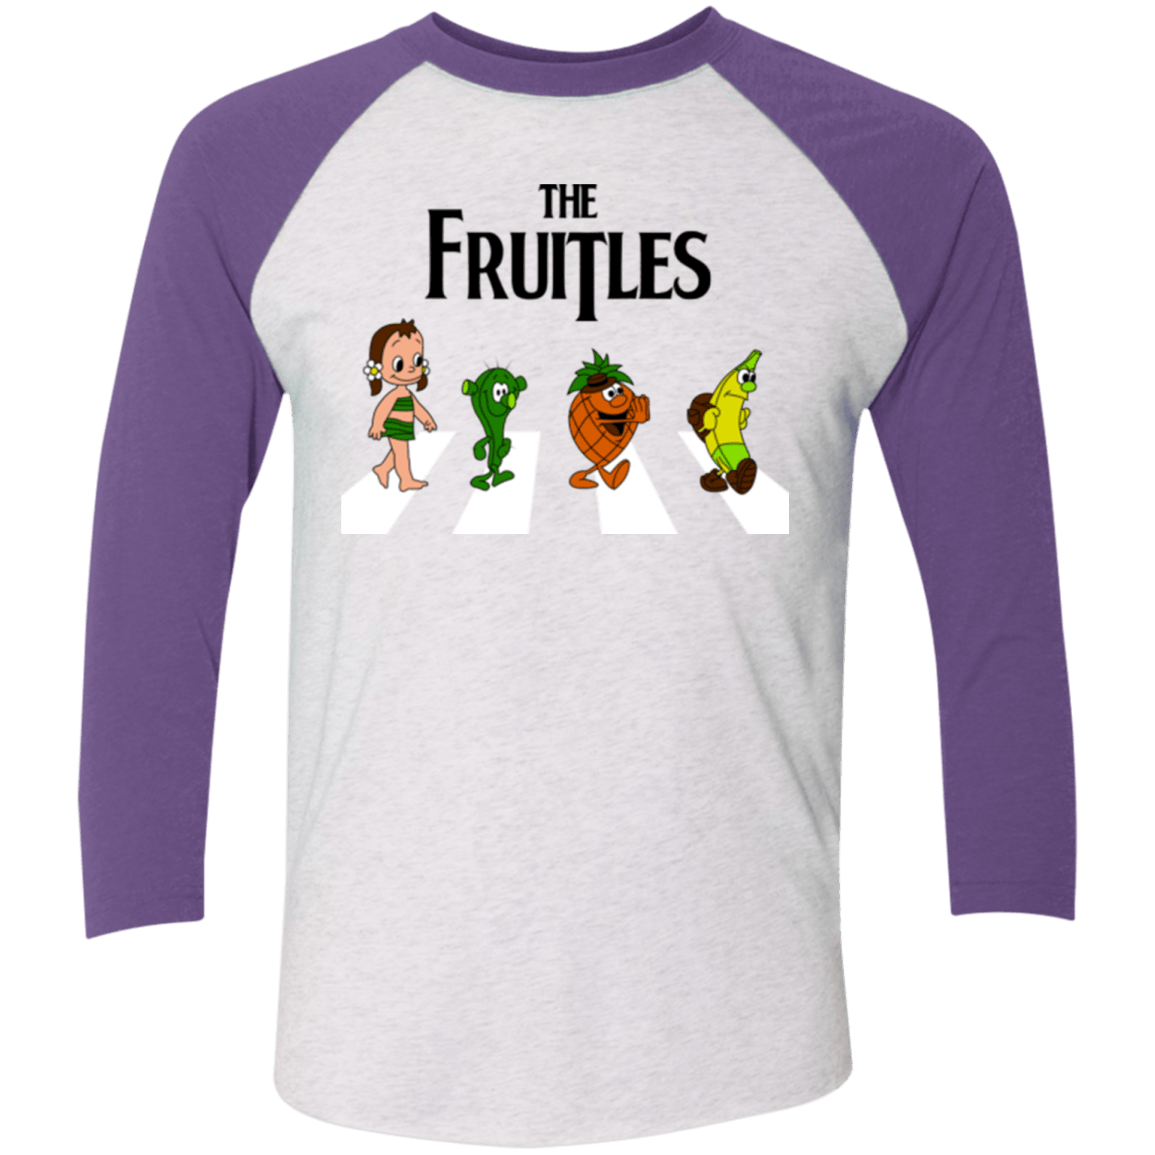 T-Shirts Heather White/Purple Rush / X-Small The Fruitles Men's Triblend 3/4 Sleeve